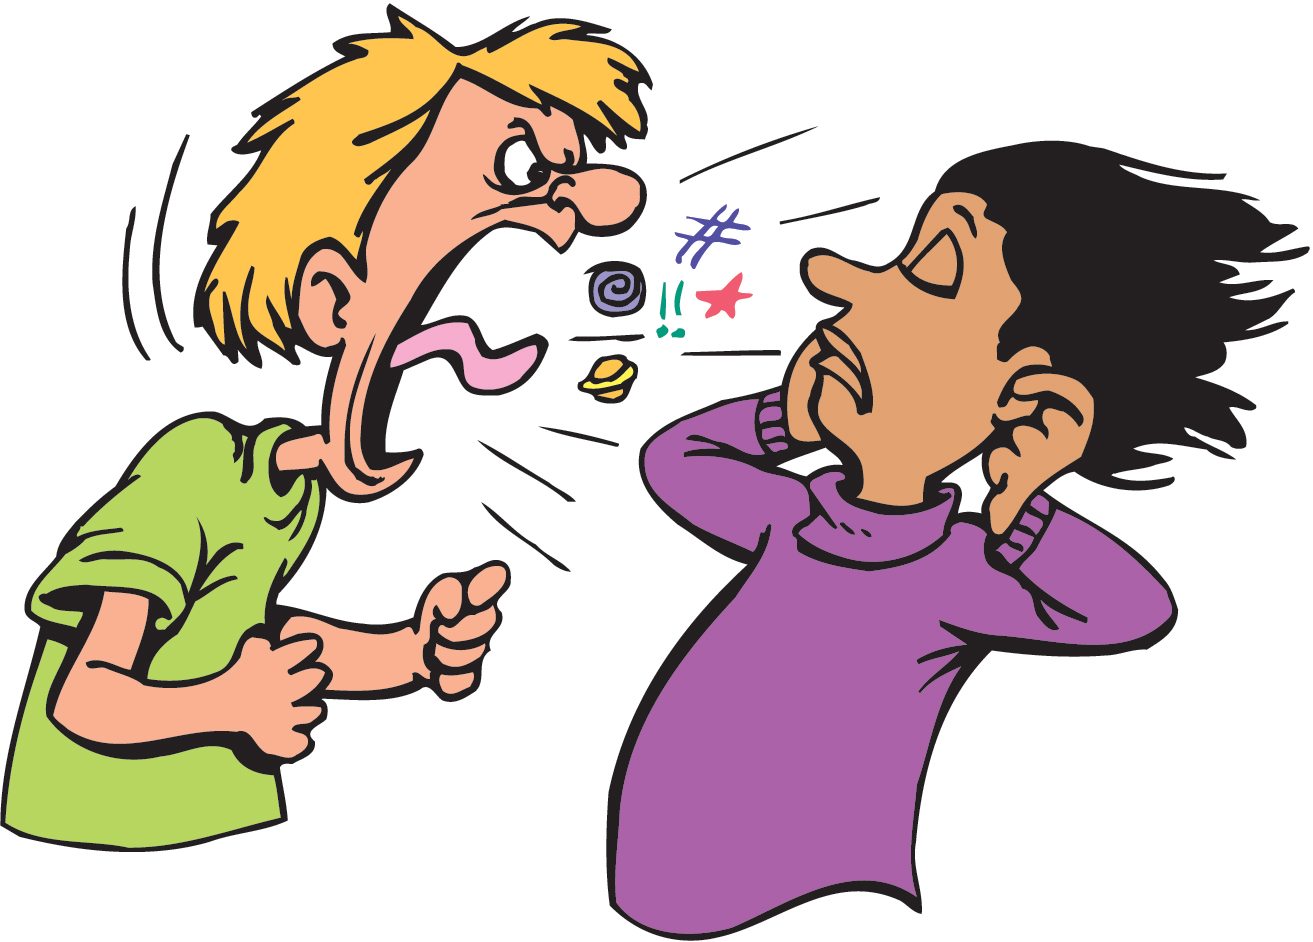 Clip Arts Related To : yelling clip art. view all Man Yelling Cliparts). 